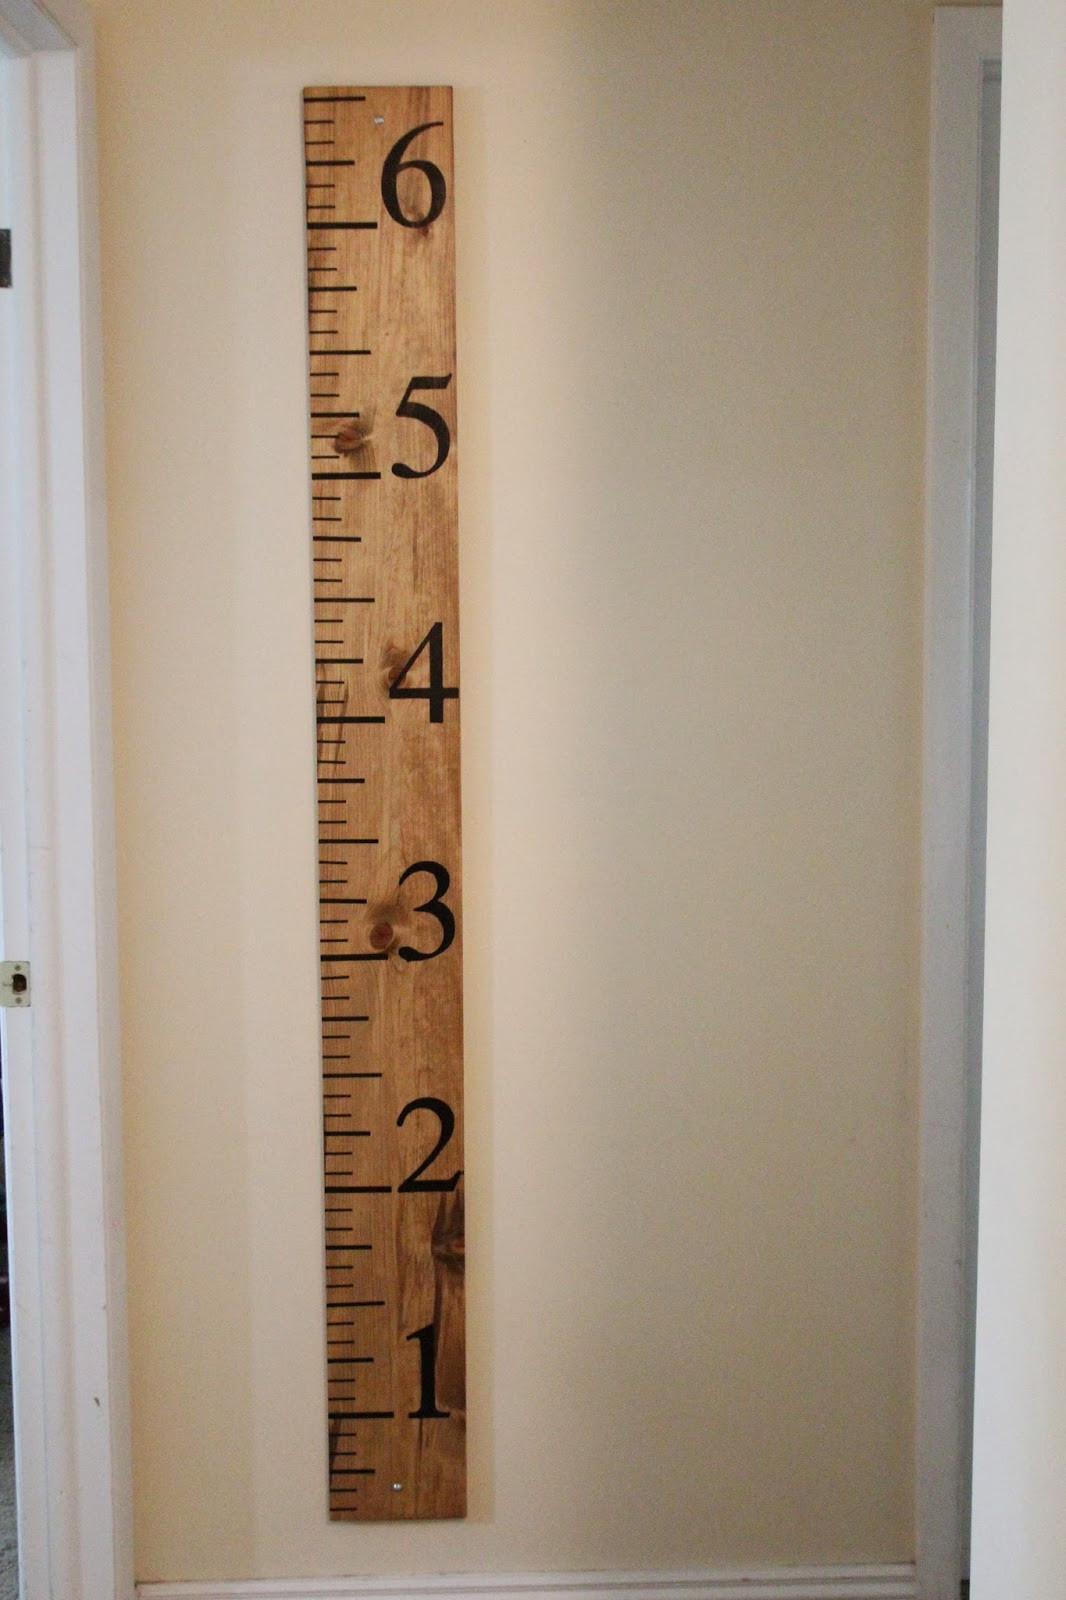 DIY Wooden Growth Chart
 Mommy Vignettes Wood Growth Chart Tutorial